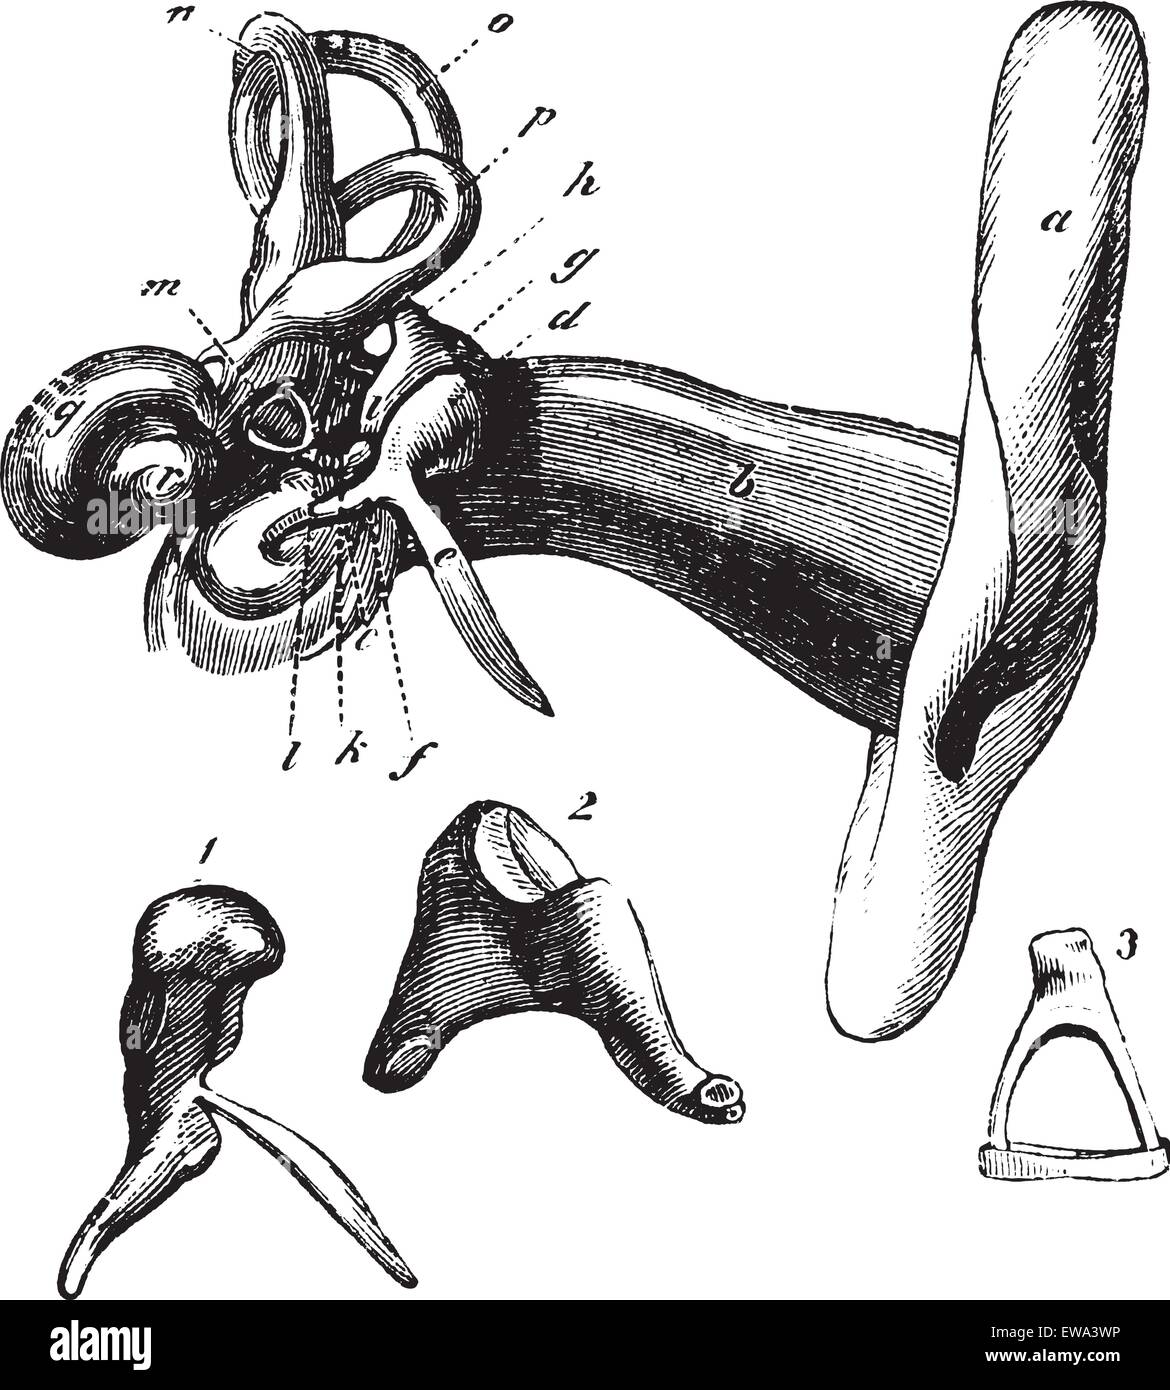 Human ear anatomy or Parts of the hearing aid. - A, outer ear, b, canal c, tympanic membrane; d, head of the hammer; e process of bone hammer, f, hammer handle; g, anvil (incus), h, i, short process and long process of the anvil; k, L, articulation of the anvil and the stirrup; m, stirrup (stapes), n, o, p, semicircular canals; q, snail (cochlea) r, top (apex) of the cochlea: 1, 2, 3, hammer (malleus), anvil (incus) and stirrup (stapes), separated from each other and very large. vintage engraved illustration. Trousset encyclopedia (1886 - 1891). Stock Vector